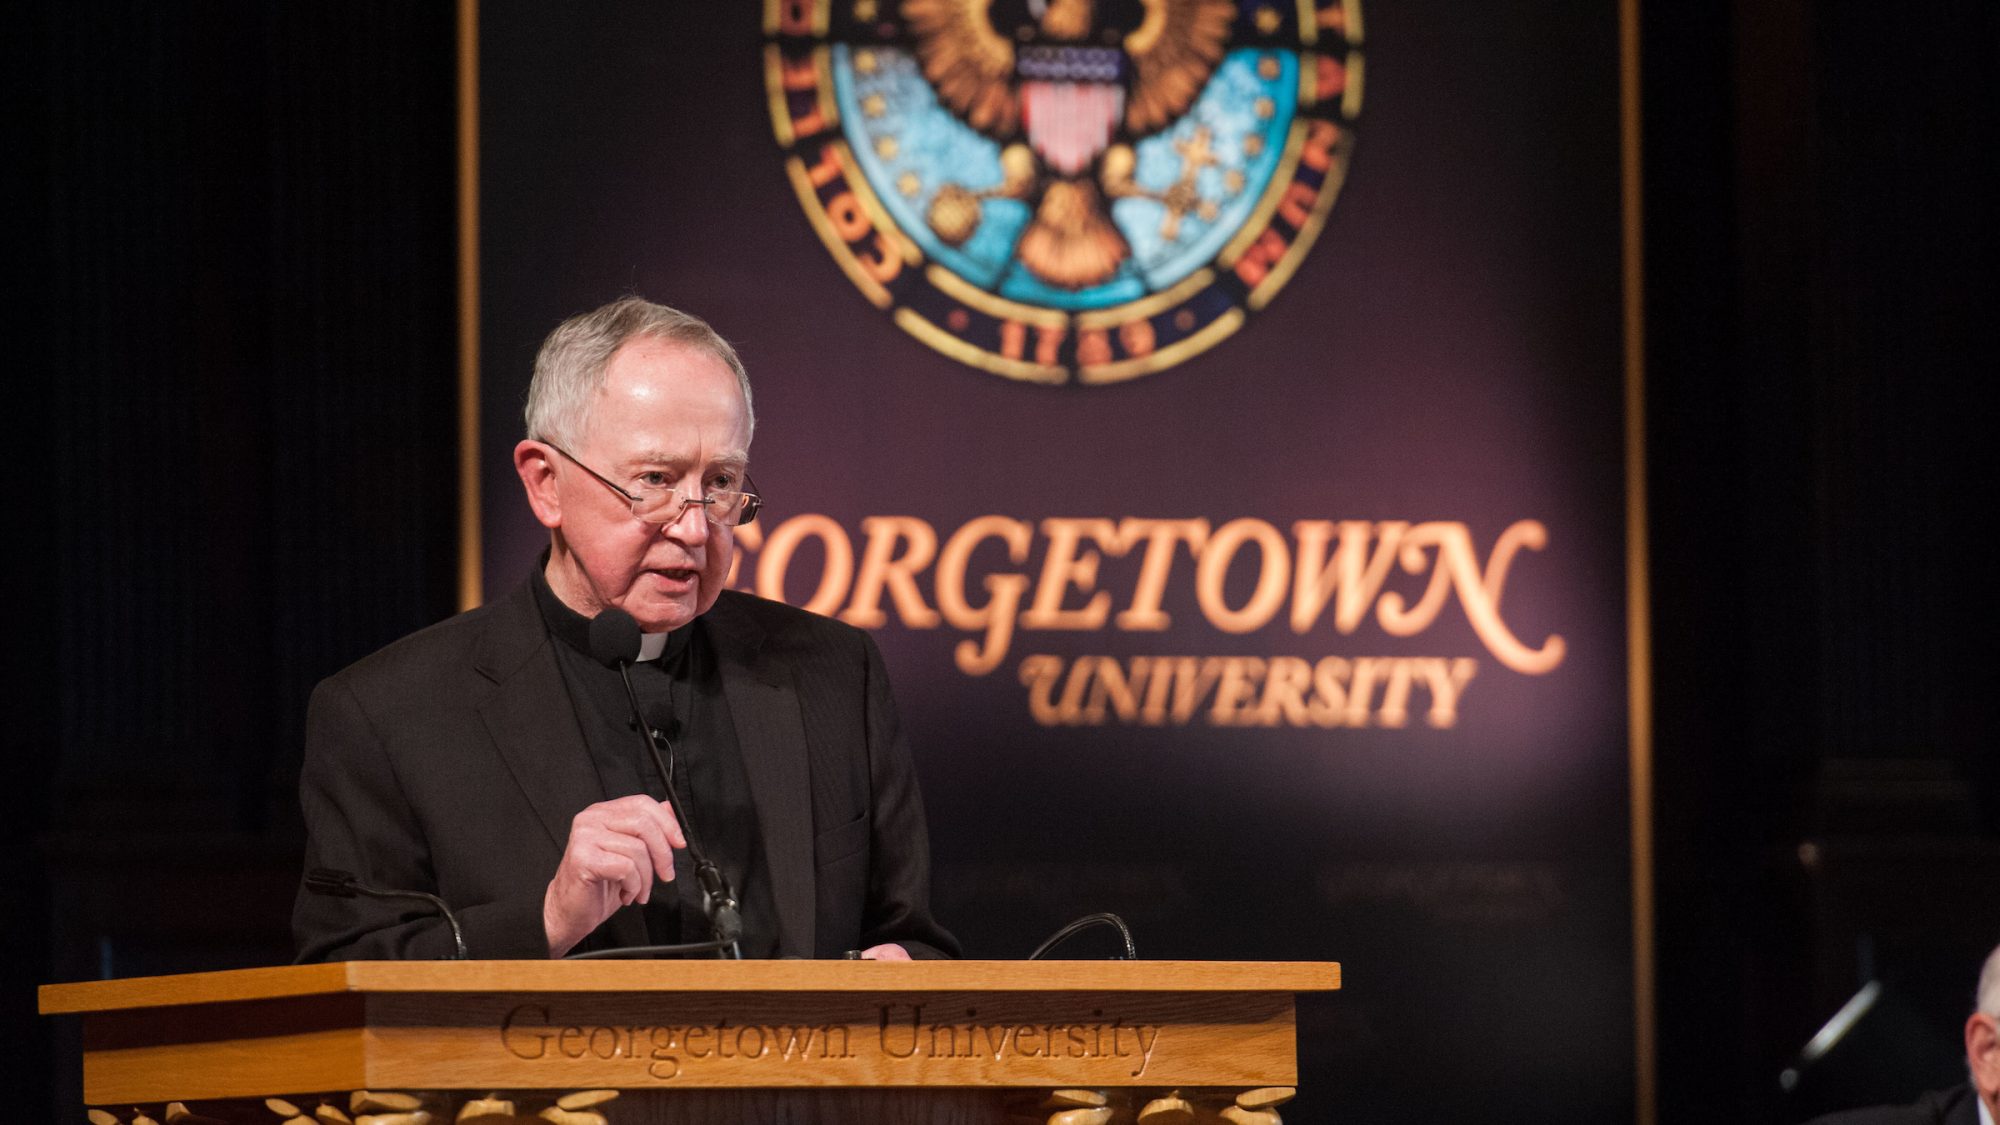 Fr. O'Malley wears glasses, a priest's collar and black clothes while giving a speech in front of a Georgetown University sign